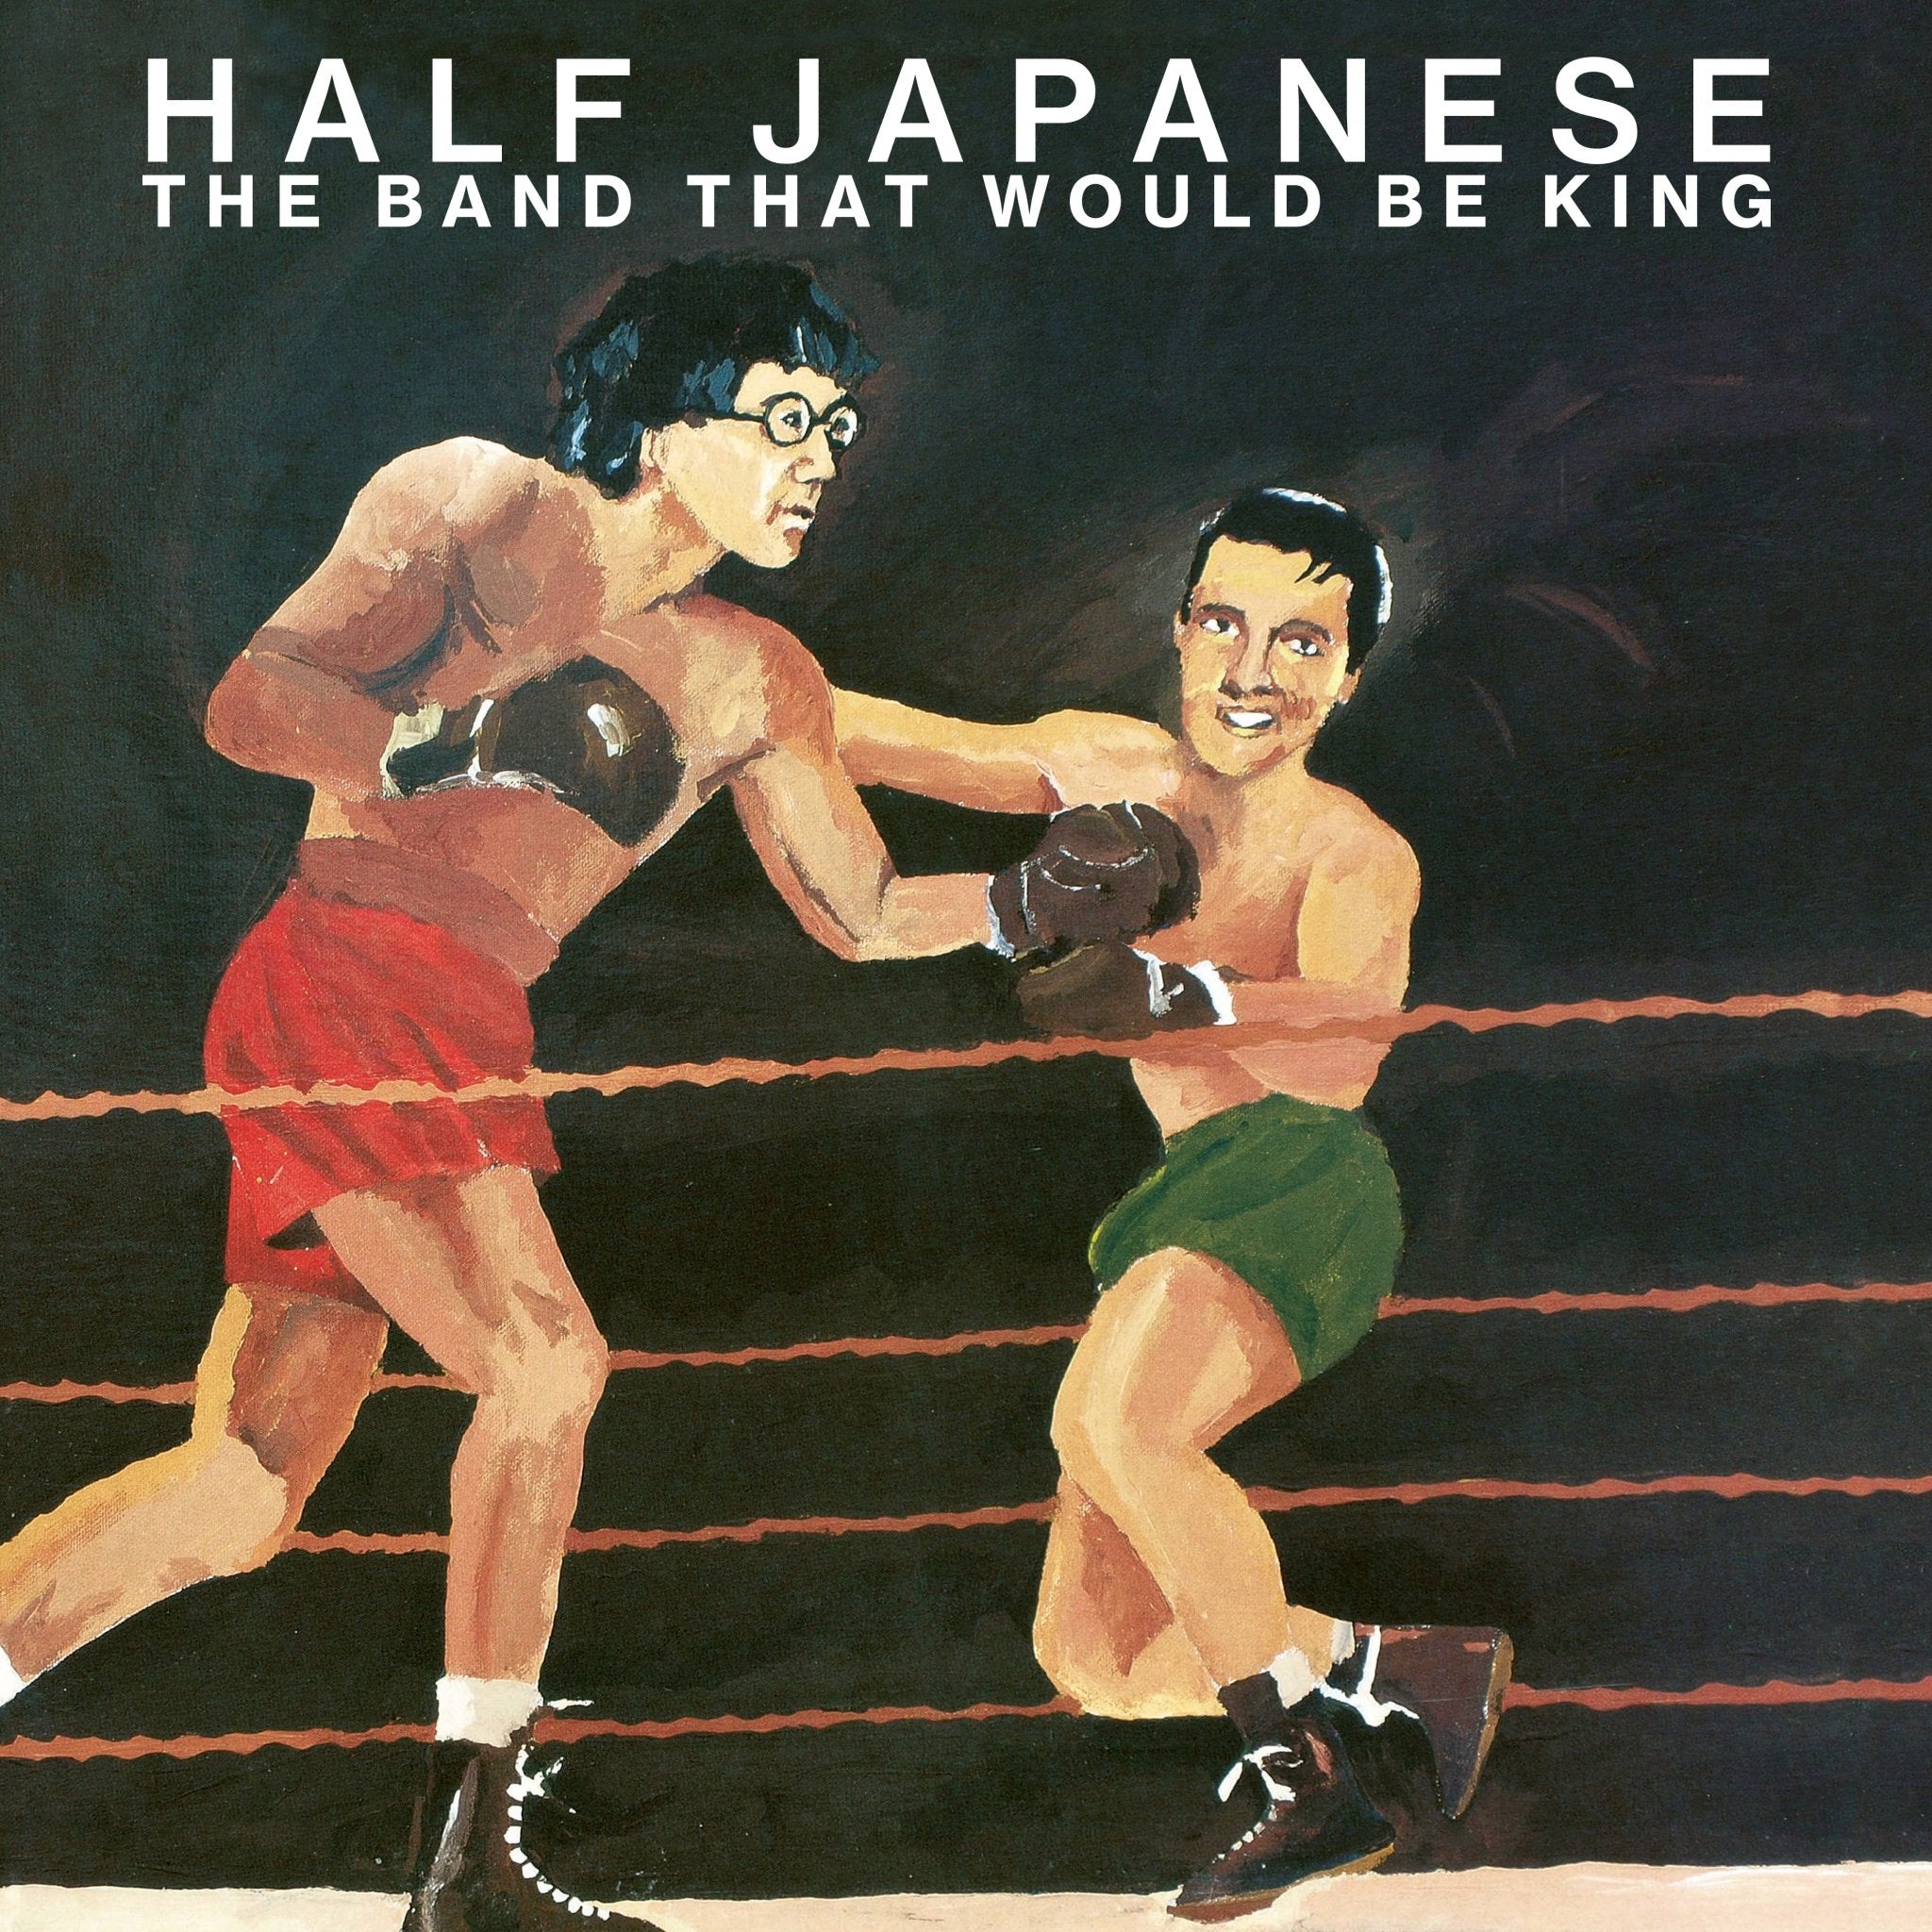 Half Japanese - The Band That Would Be King - 33RPM